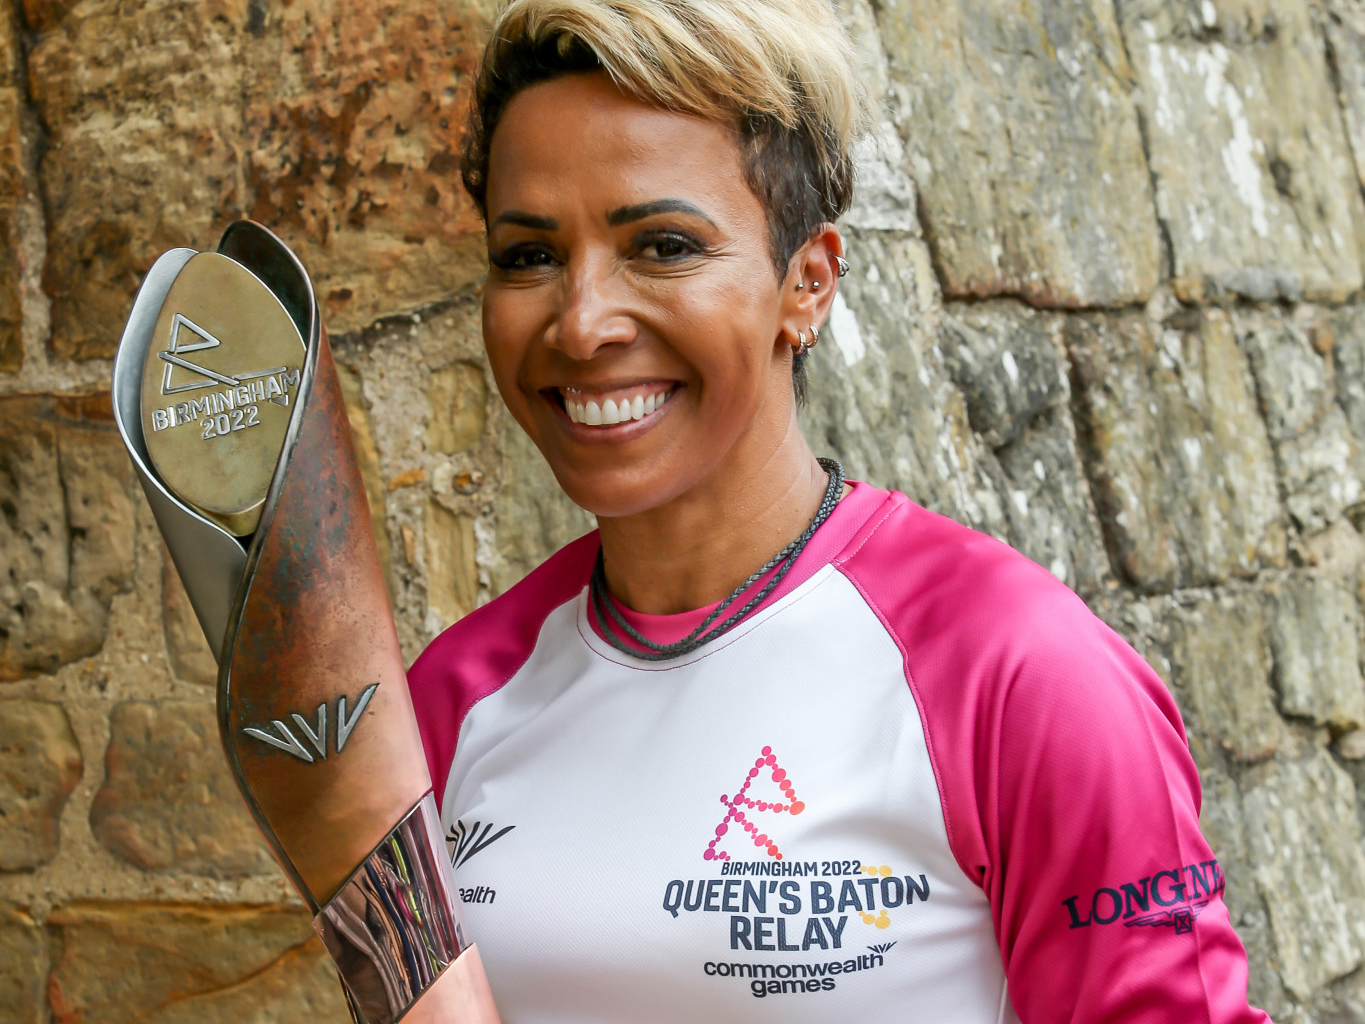 Double Olympic champion Dame Kelly Holmes carries Commonwealth Games Queen's Baton in Tonbridge